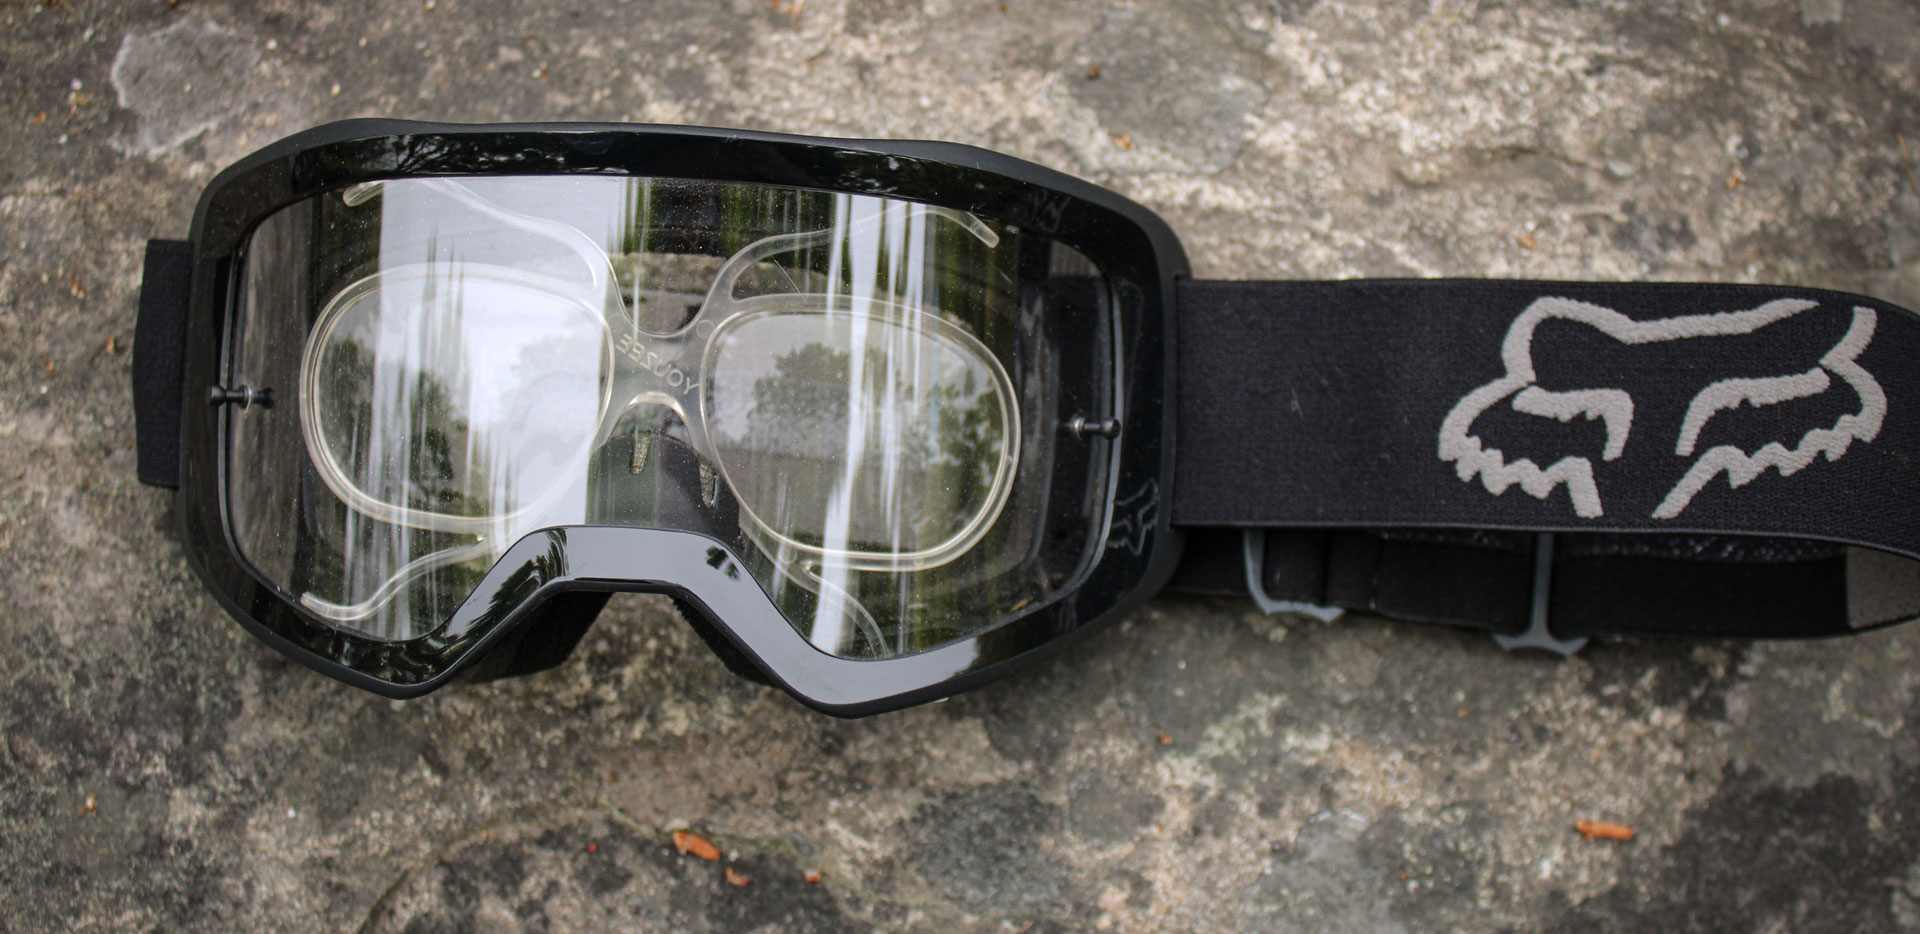 YouZee Clip-in RX Goggle Insert Review